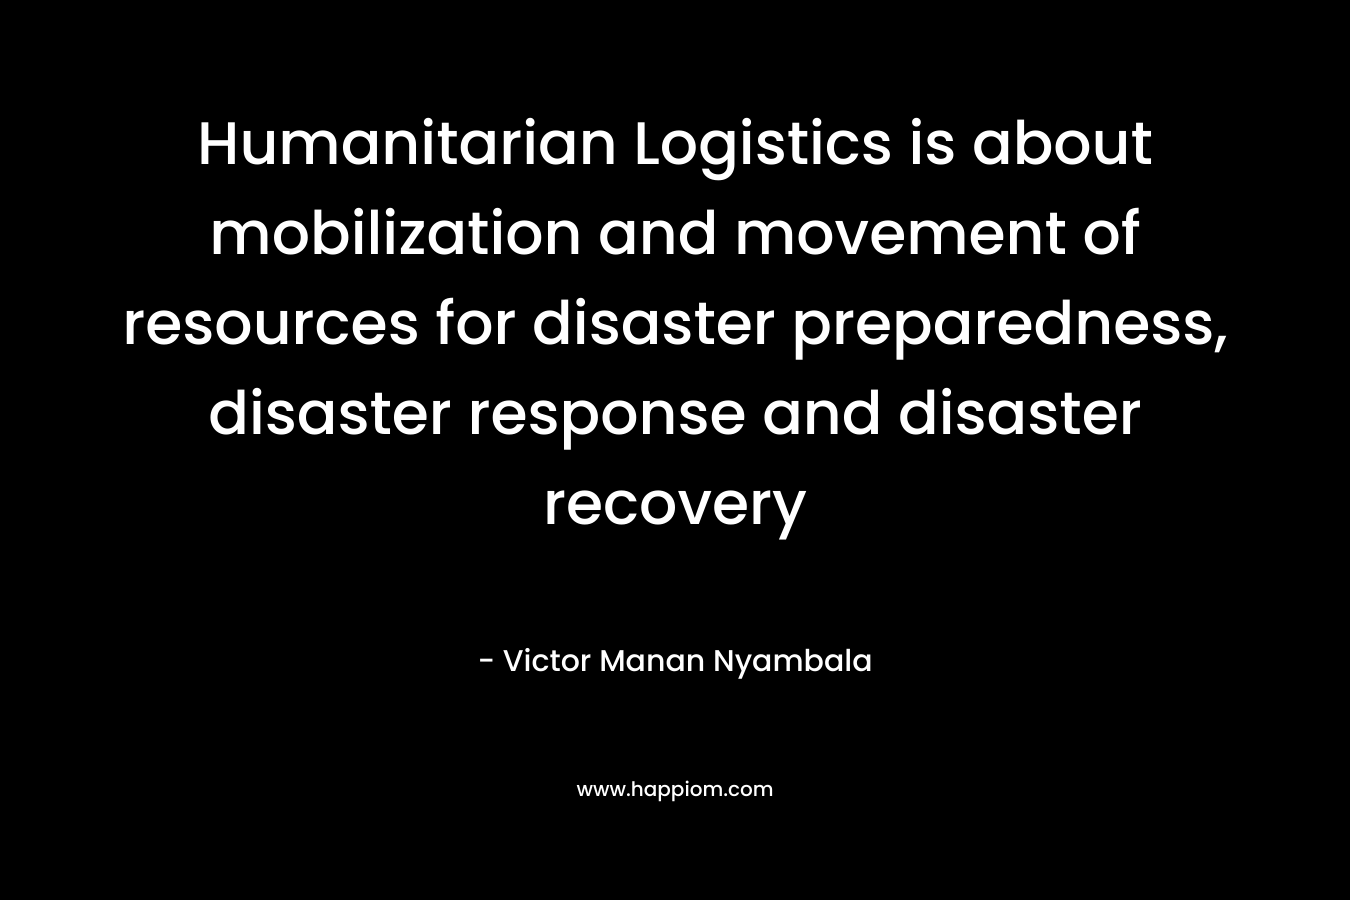 Humanitarian Logistics is about mobilization and movement of resources for disaster preparedness, disaster response and disaster recovery – Victor Manan Nyambala